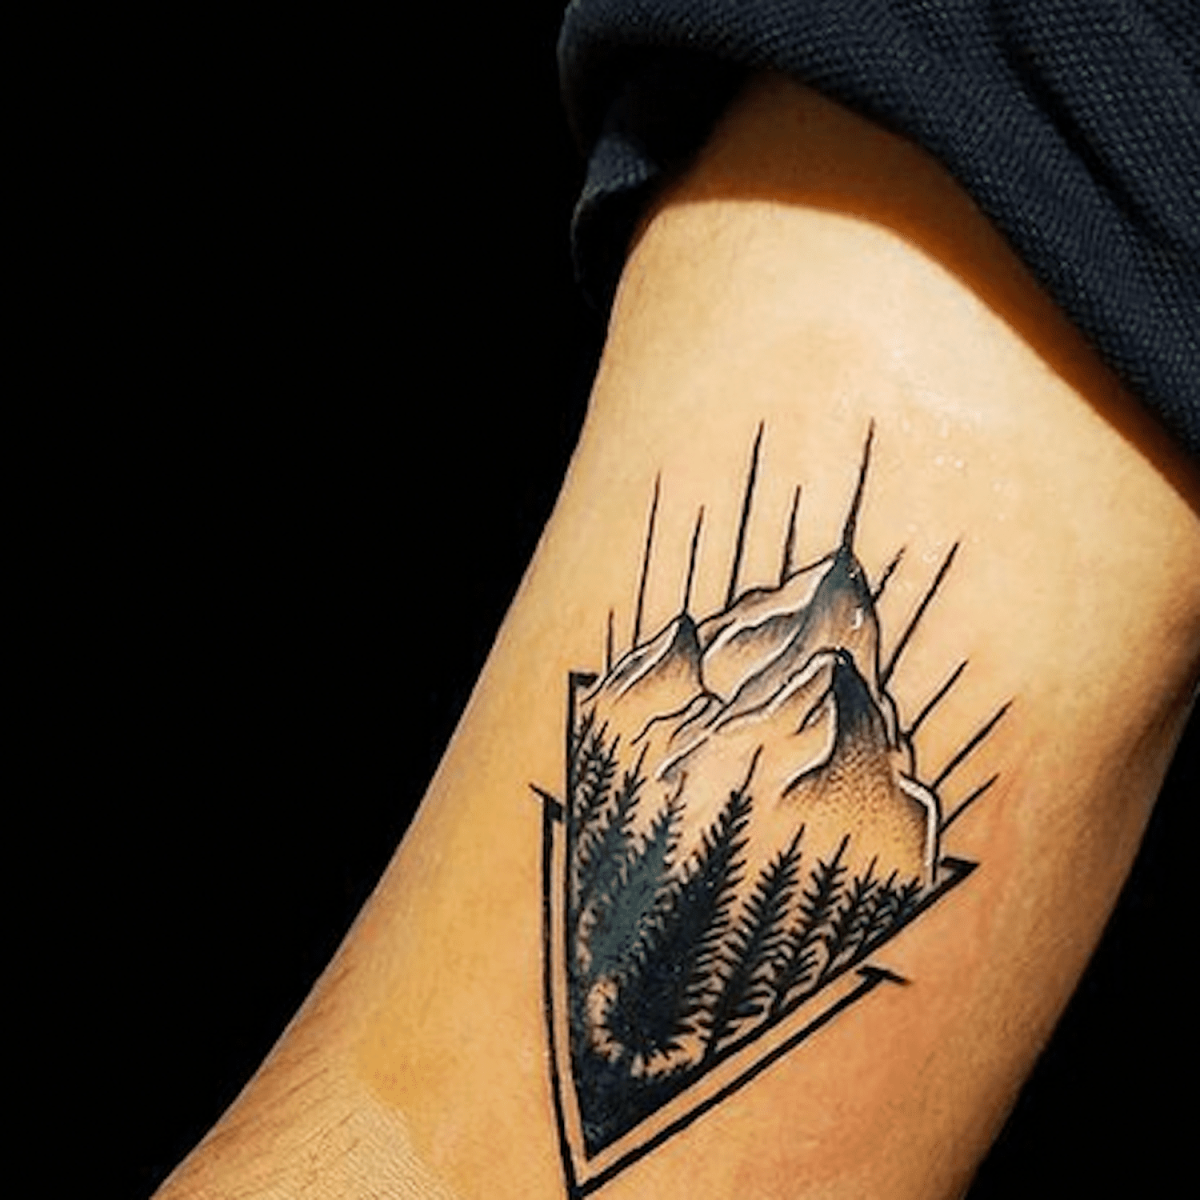 Mountain Tattoo Ideas for Every Aesthetic